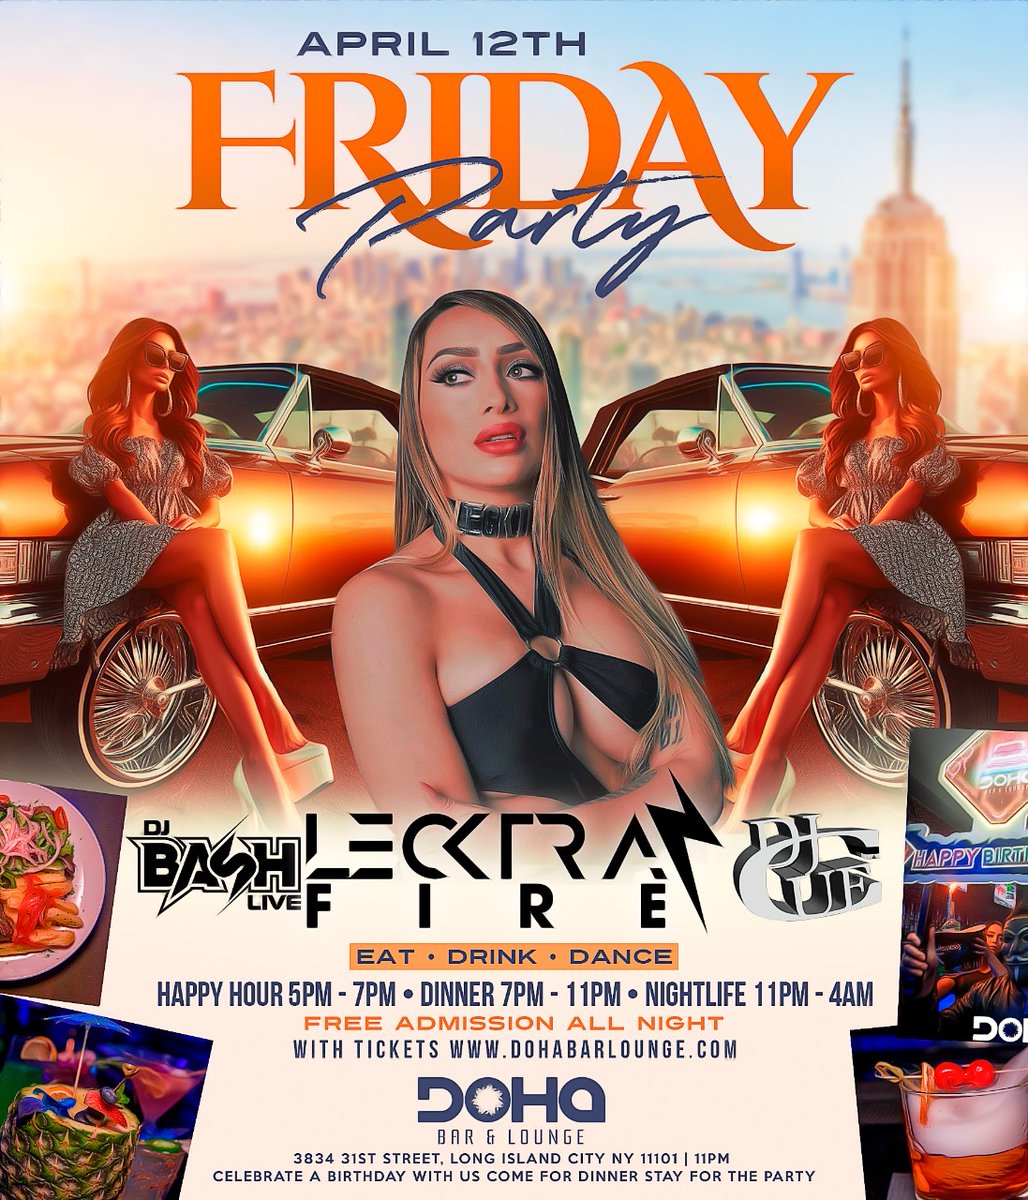 Friday Night Dinner Party at Doha Bar Lounge in Queens NY patch.com/new-york/astor… #nycnights #nycnightlife #fridaynightpartynyc #partynyc #danceparty #nycnightlife #astorianightlife #dinnerparty #longislandcity #astoriany